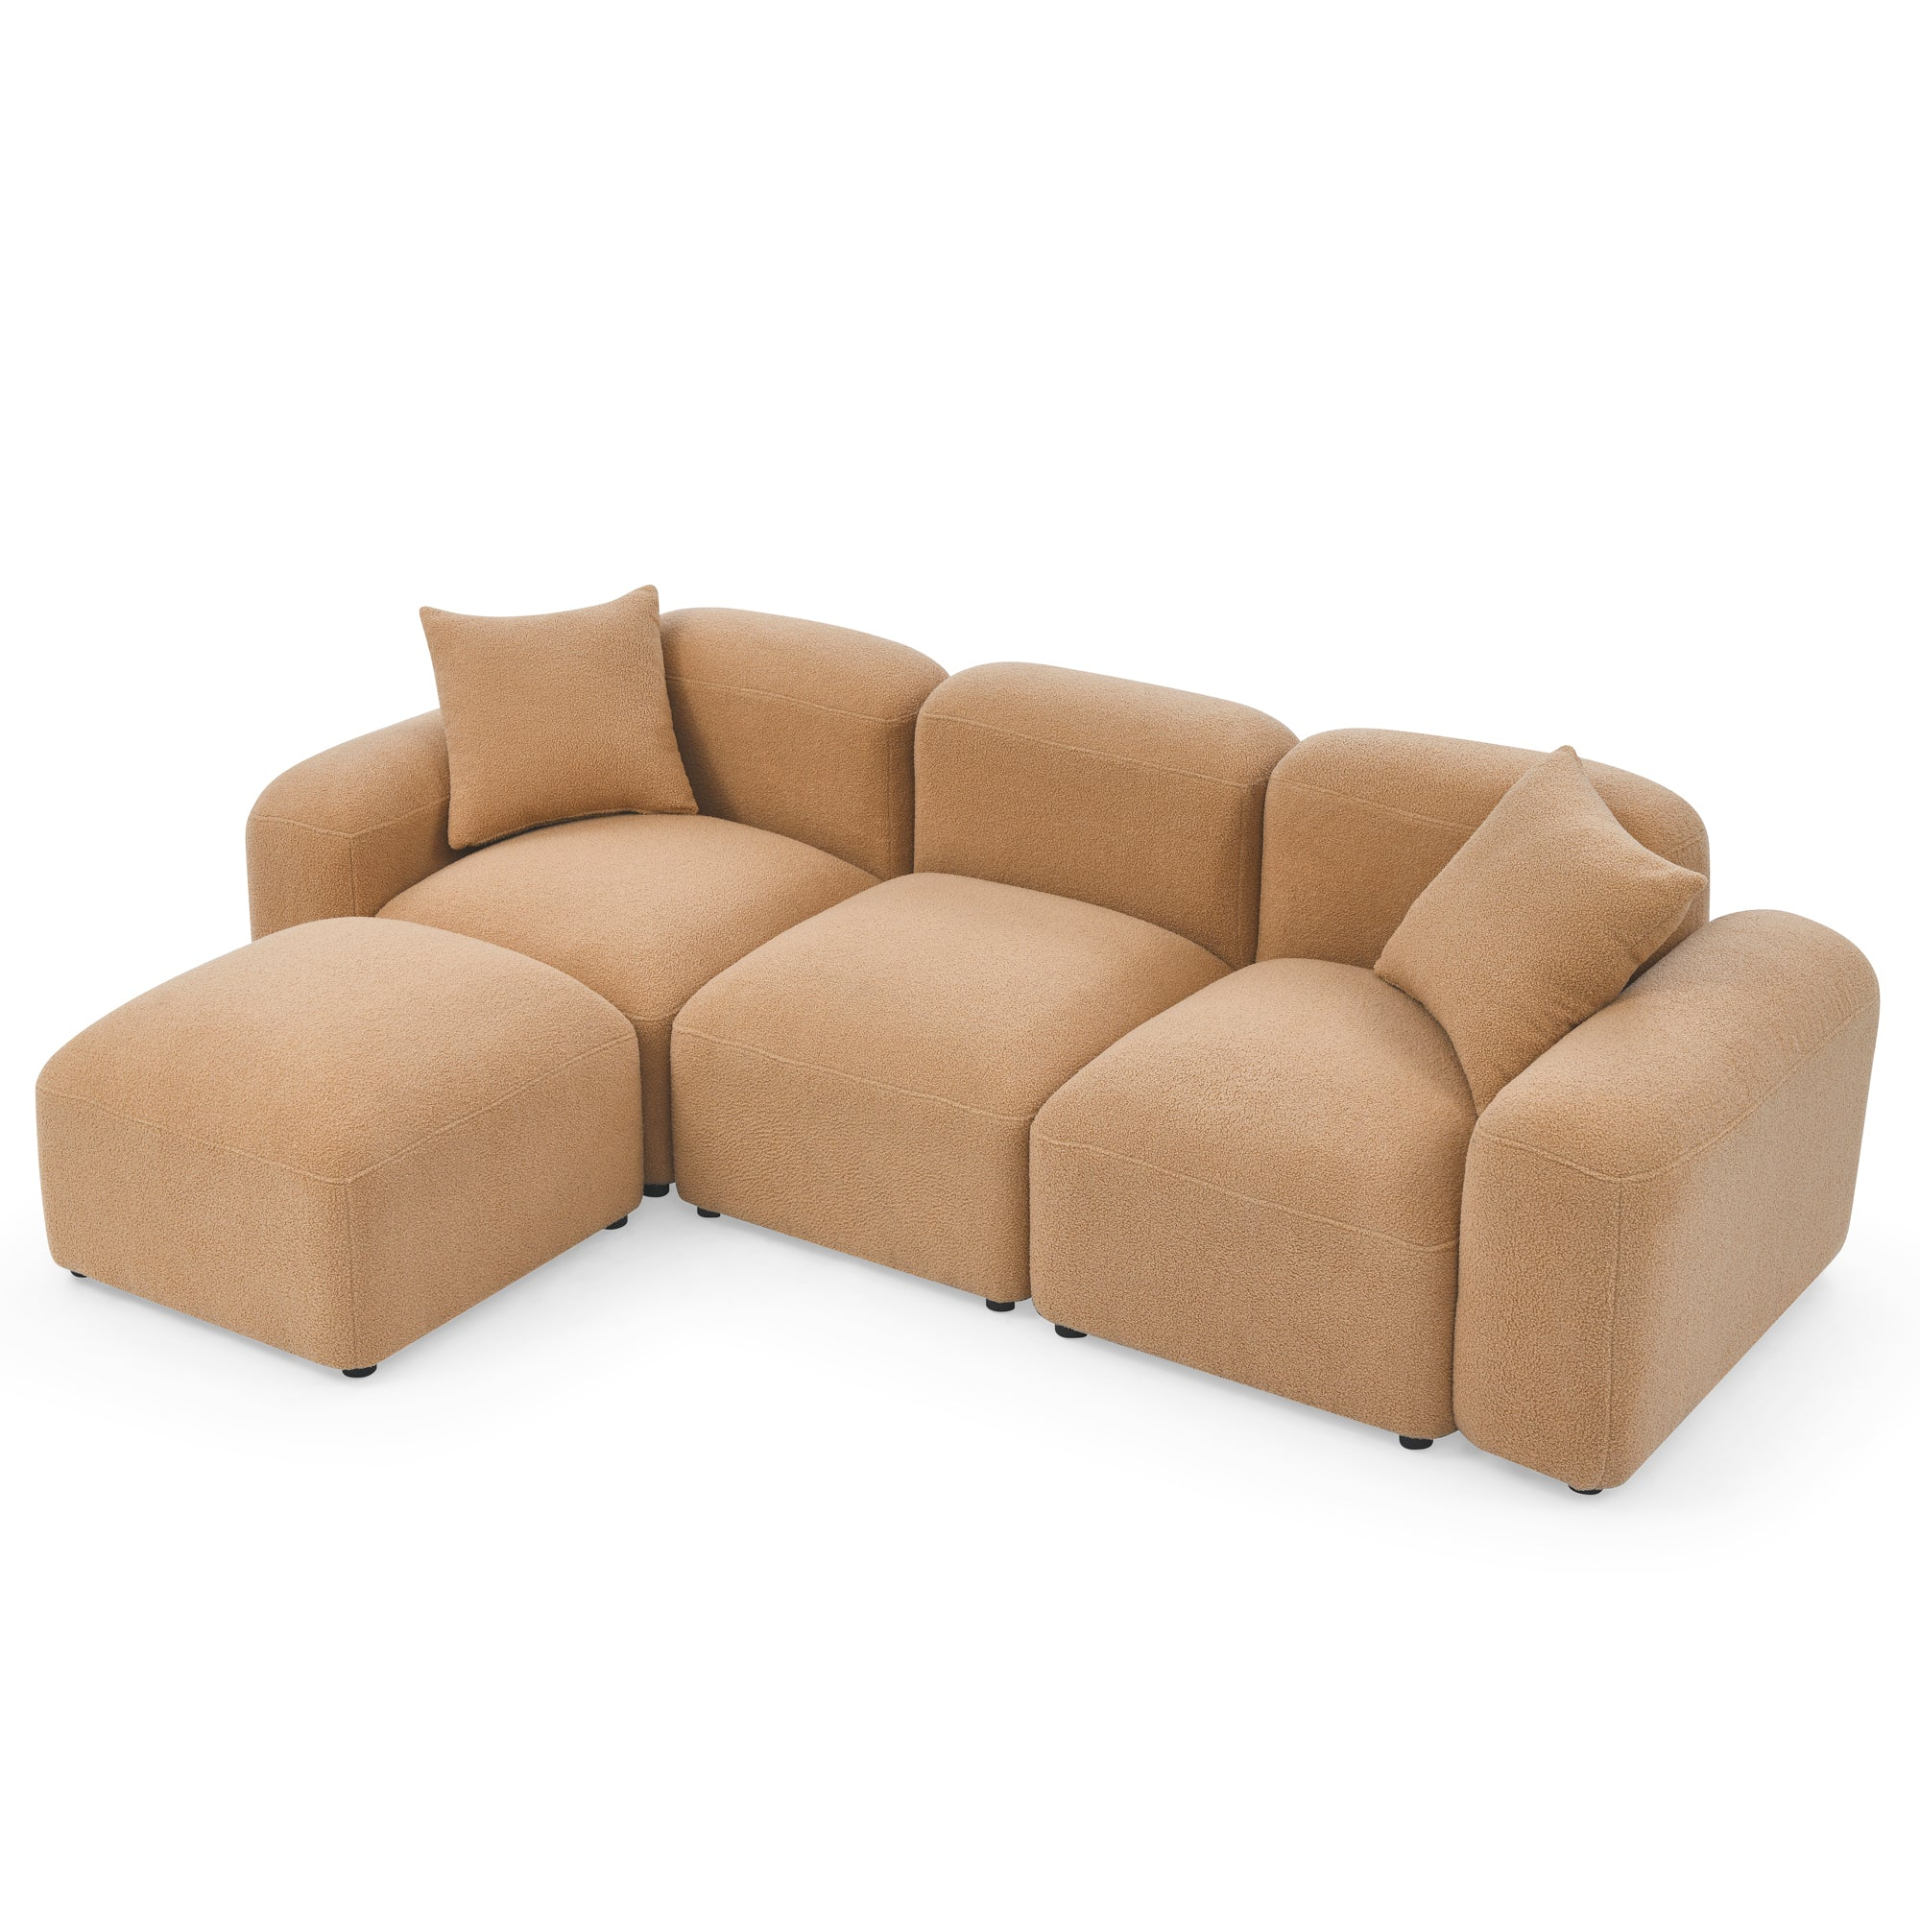 Caramel: Cozy L-Shape Modular Style Sectional Sofa with DIY Combination (94.5" x 58")